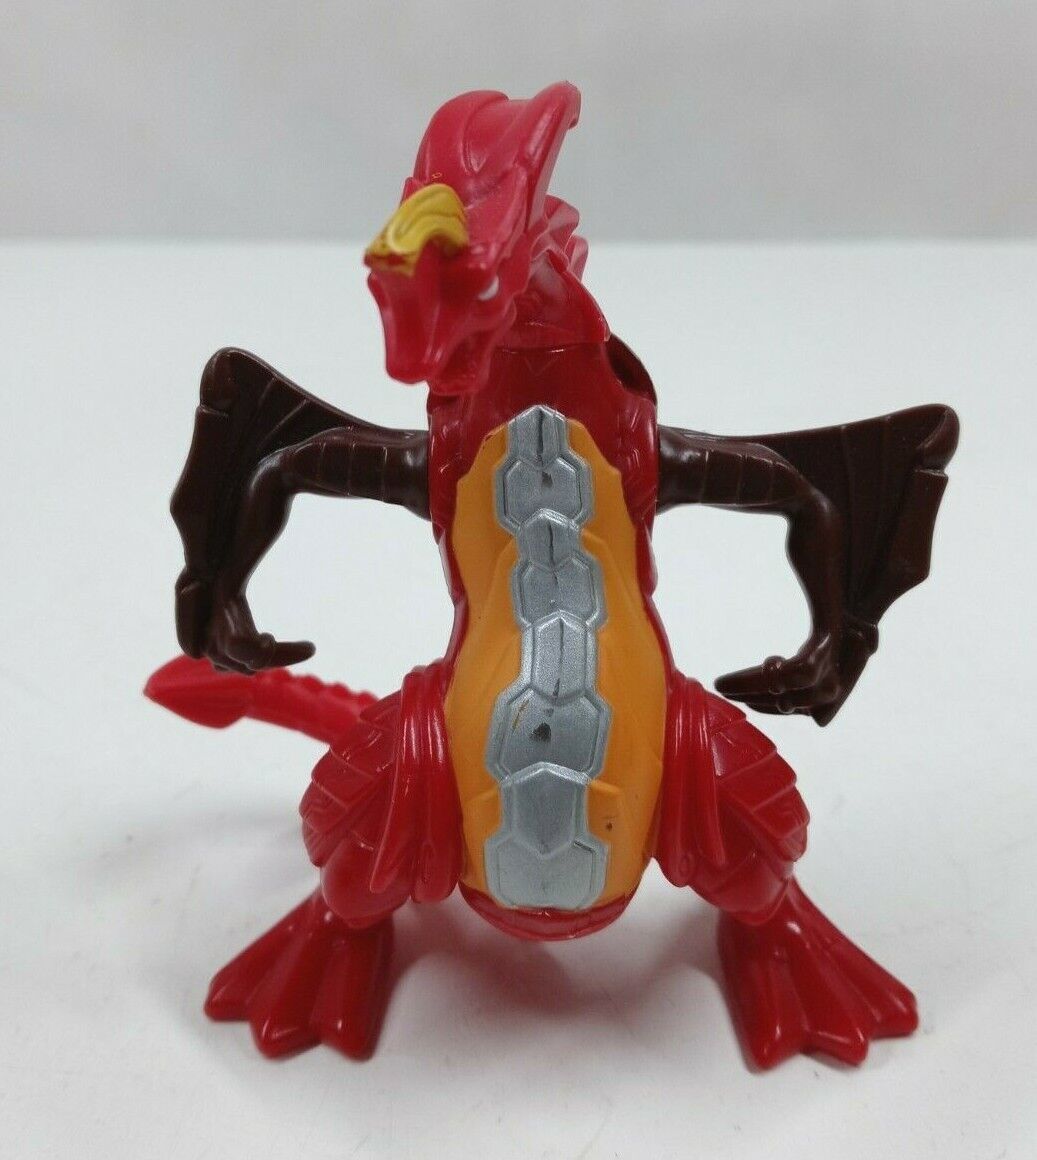 Primary image for 2009 Sega Red Dragon Bakugan Spin Master Action Figure 4" McDonald's Toy